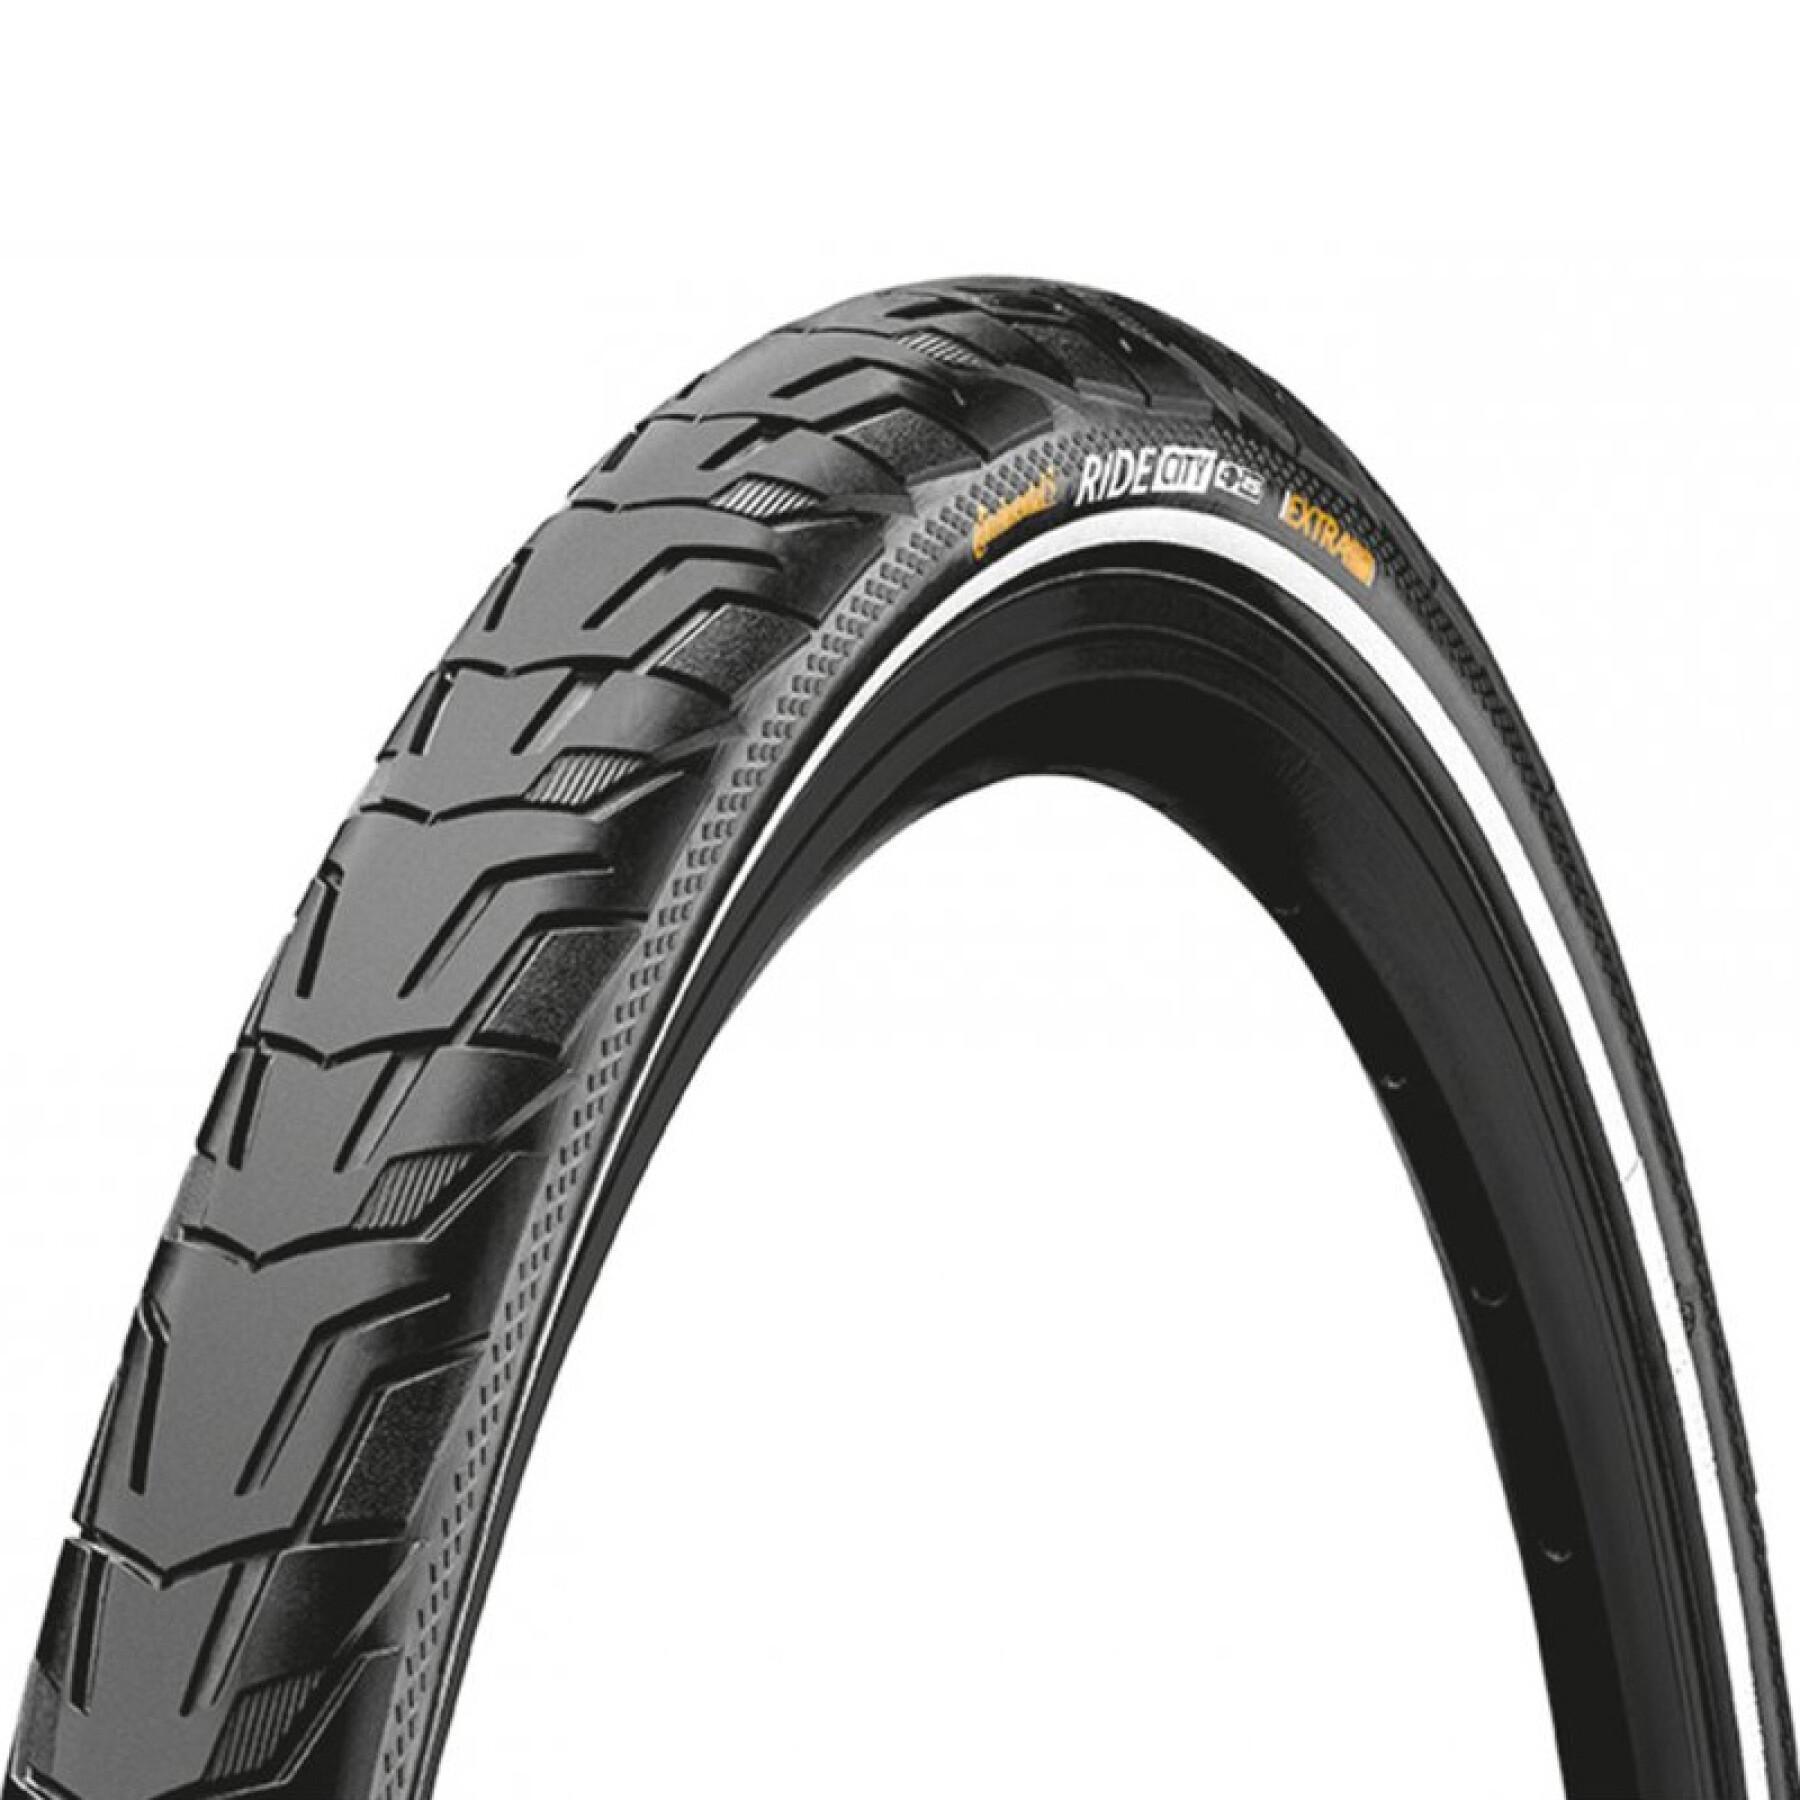 Pneumatici Continental Ride City 28x175 Extrapuncture